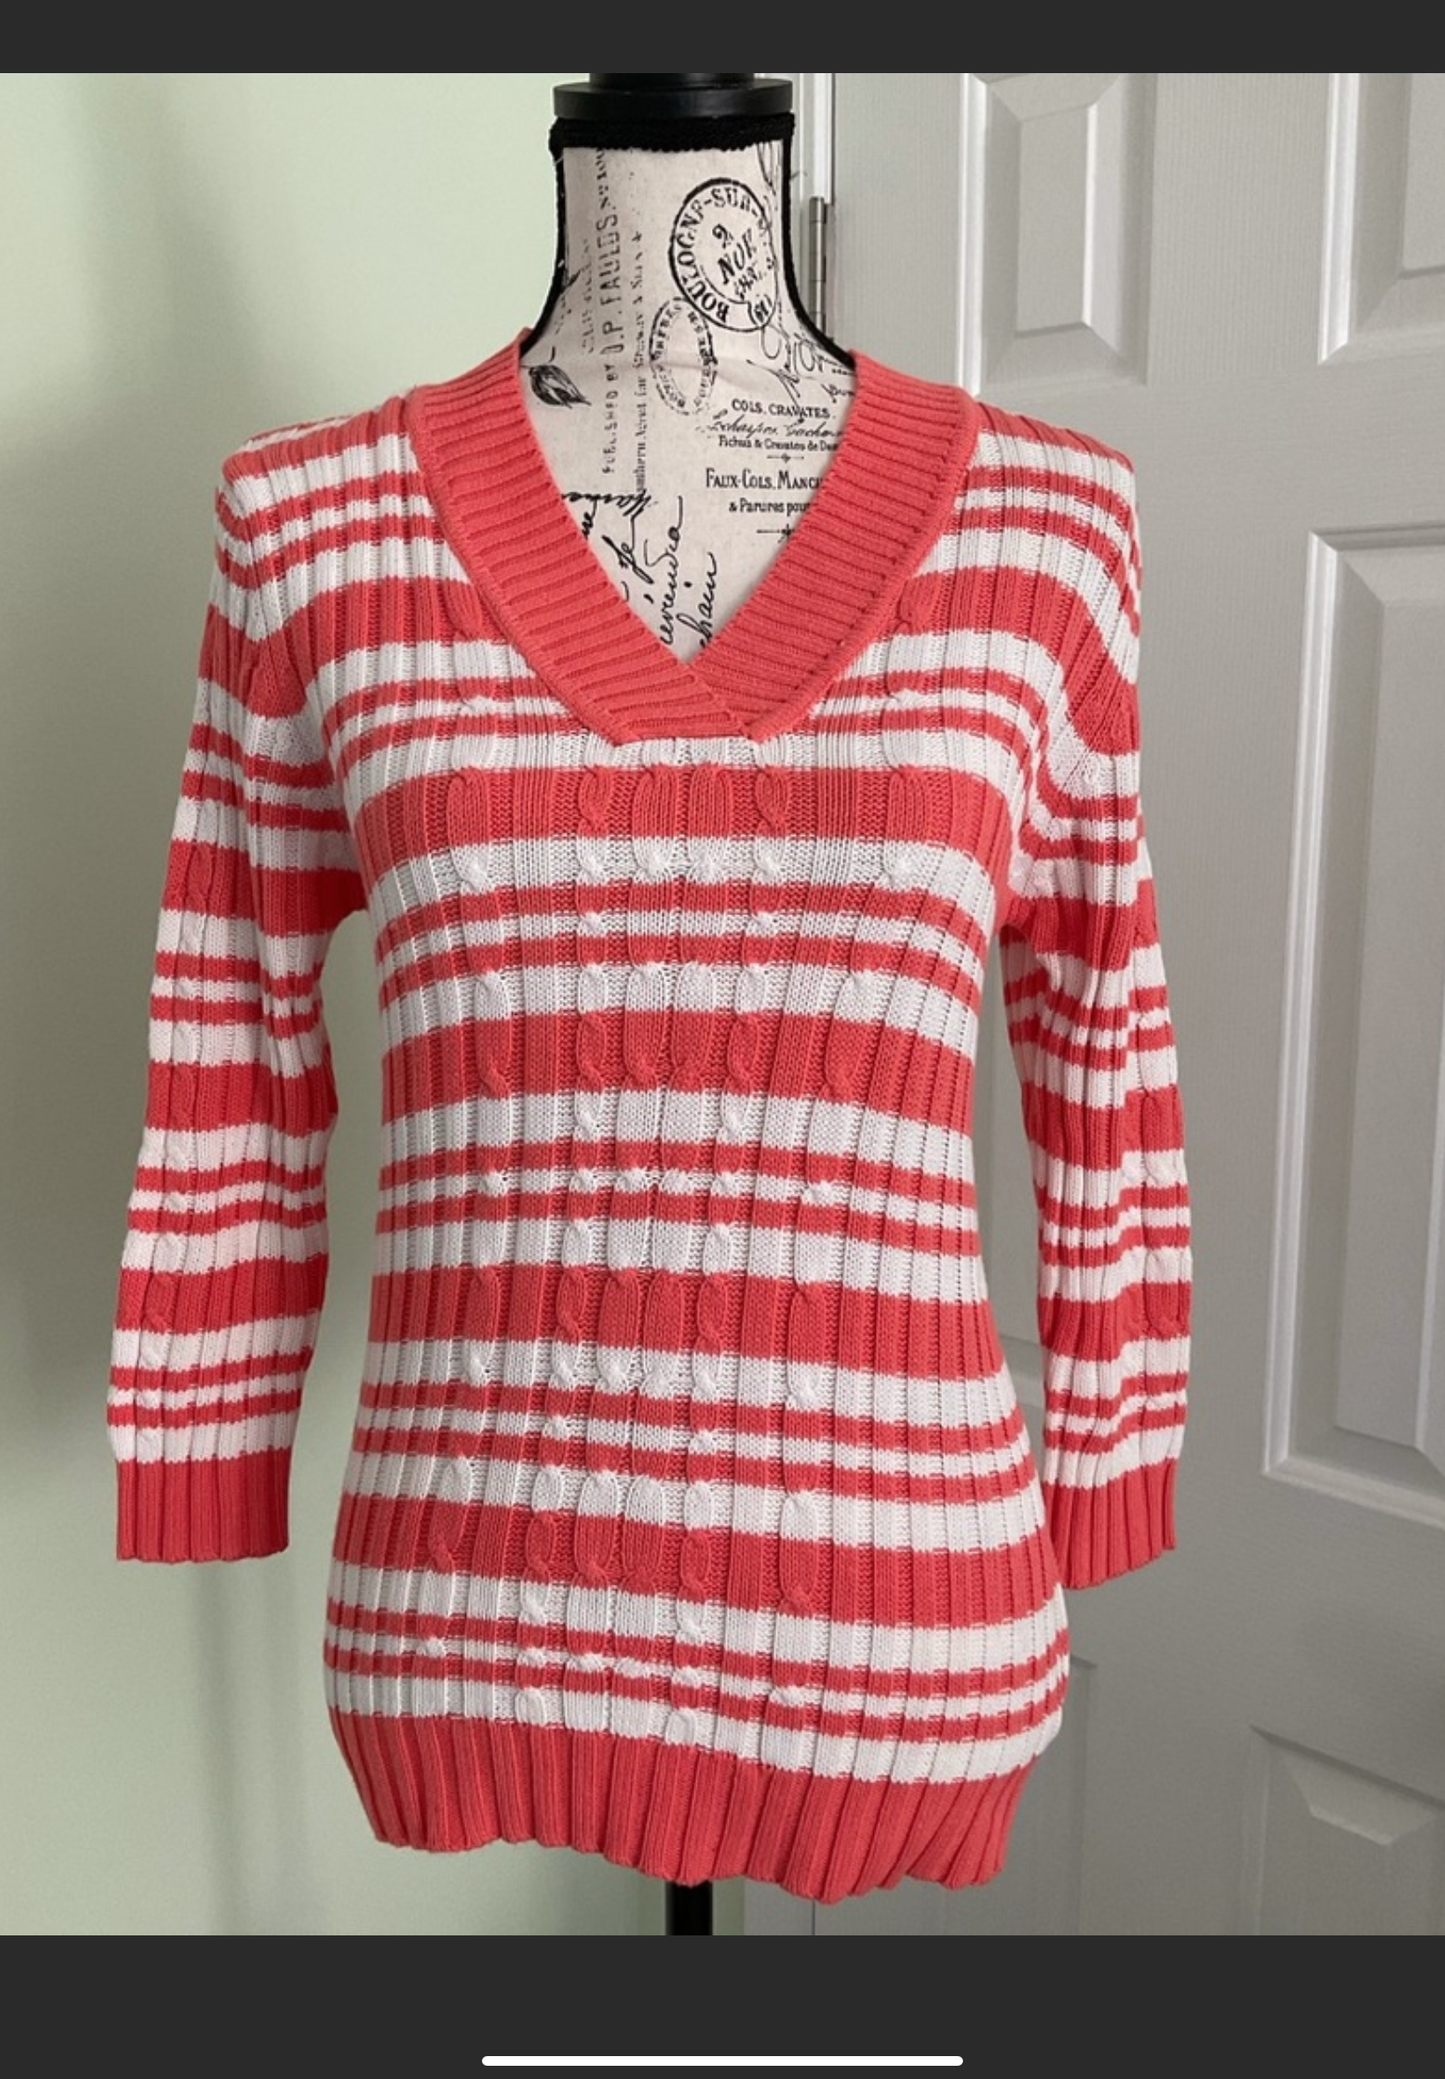 Reference Point Sweater